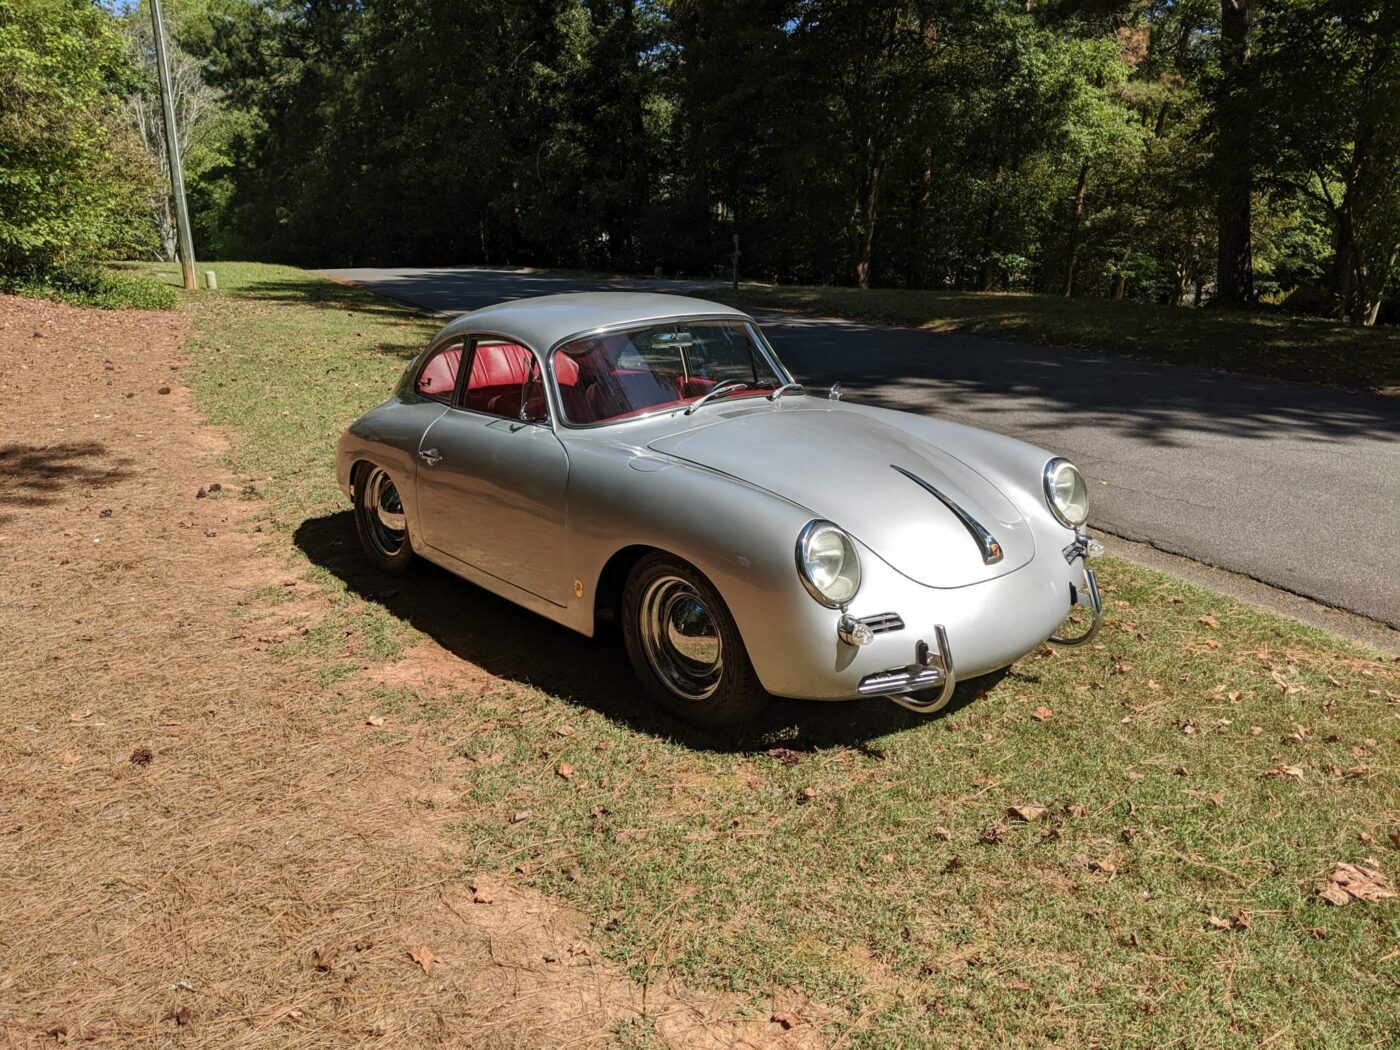 This 1962 Porsche 356B Coupe Is For Sale on Bring a Trailer - Stuttcars